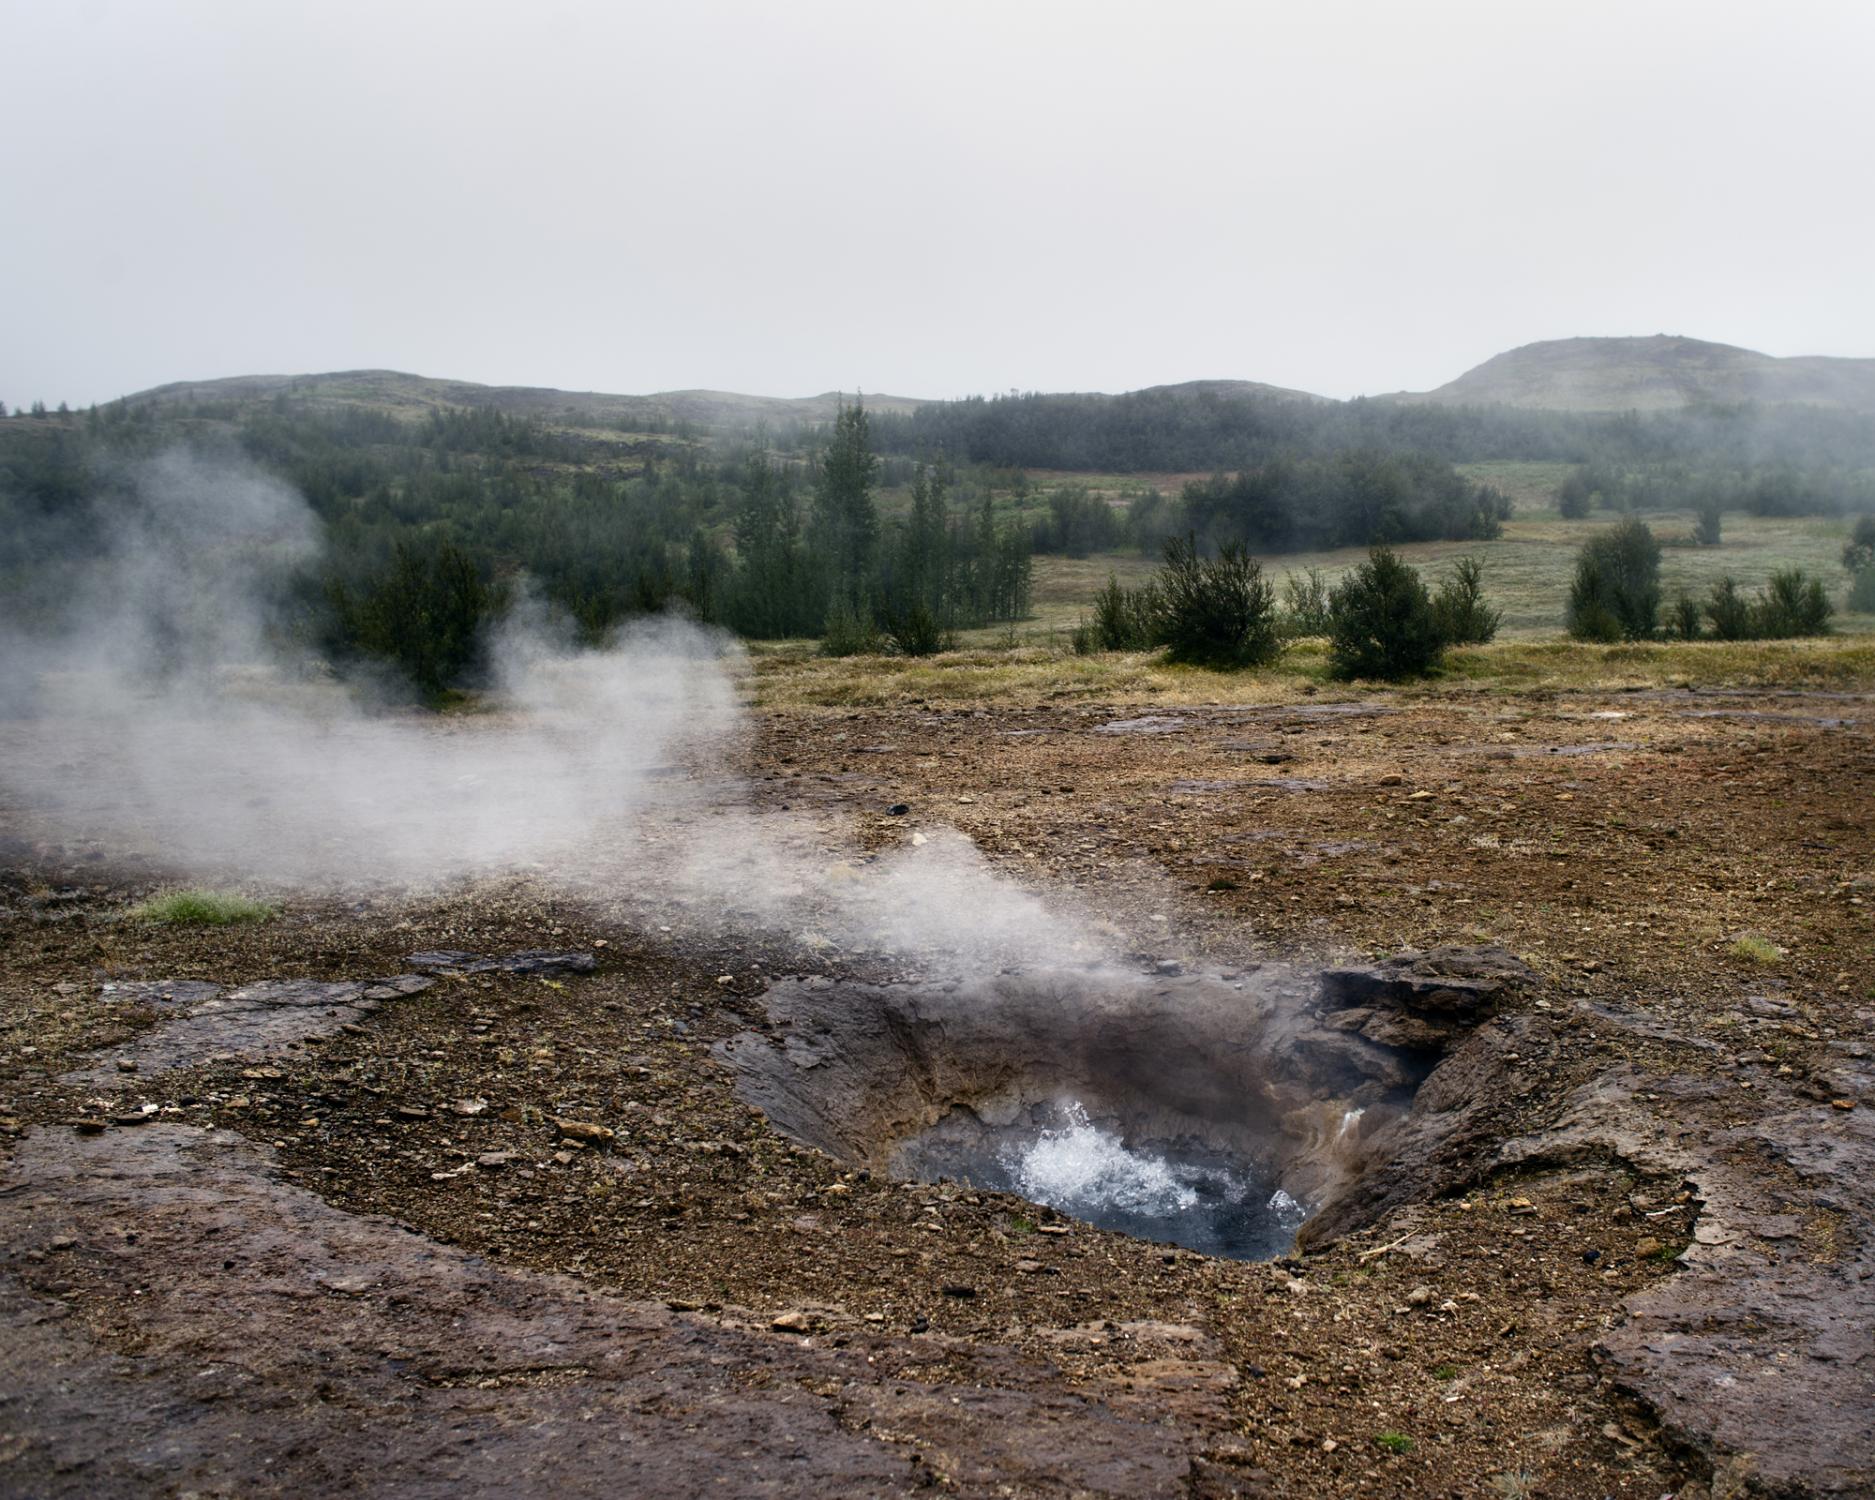 Steamland - Geothermal Power in Iceland.
August 2010.
Iceland....